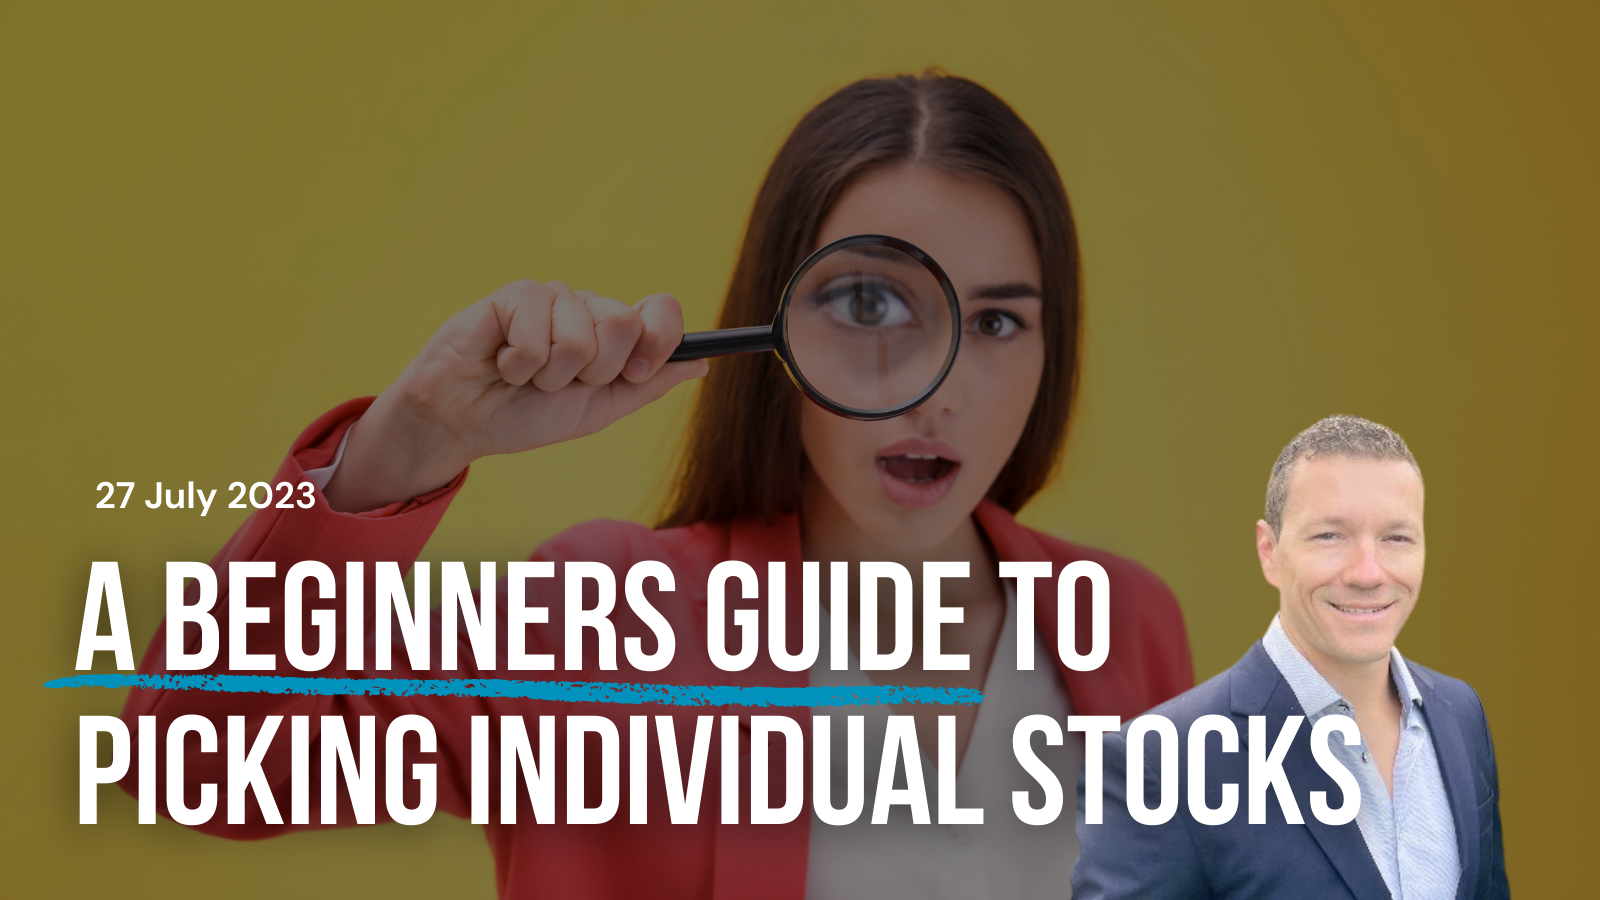 3. beginners guide to individual stocks